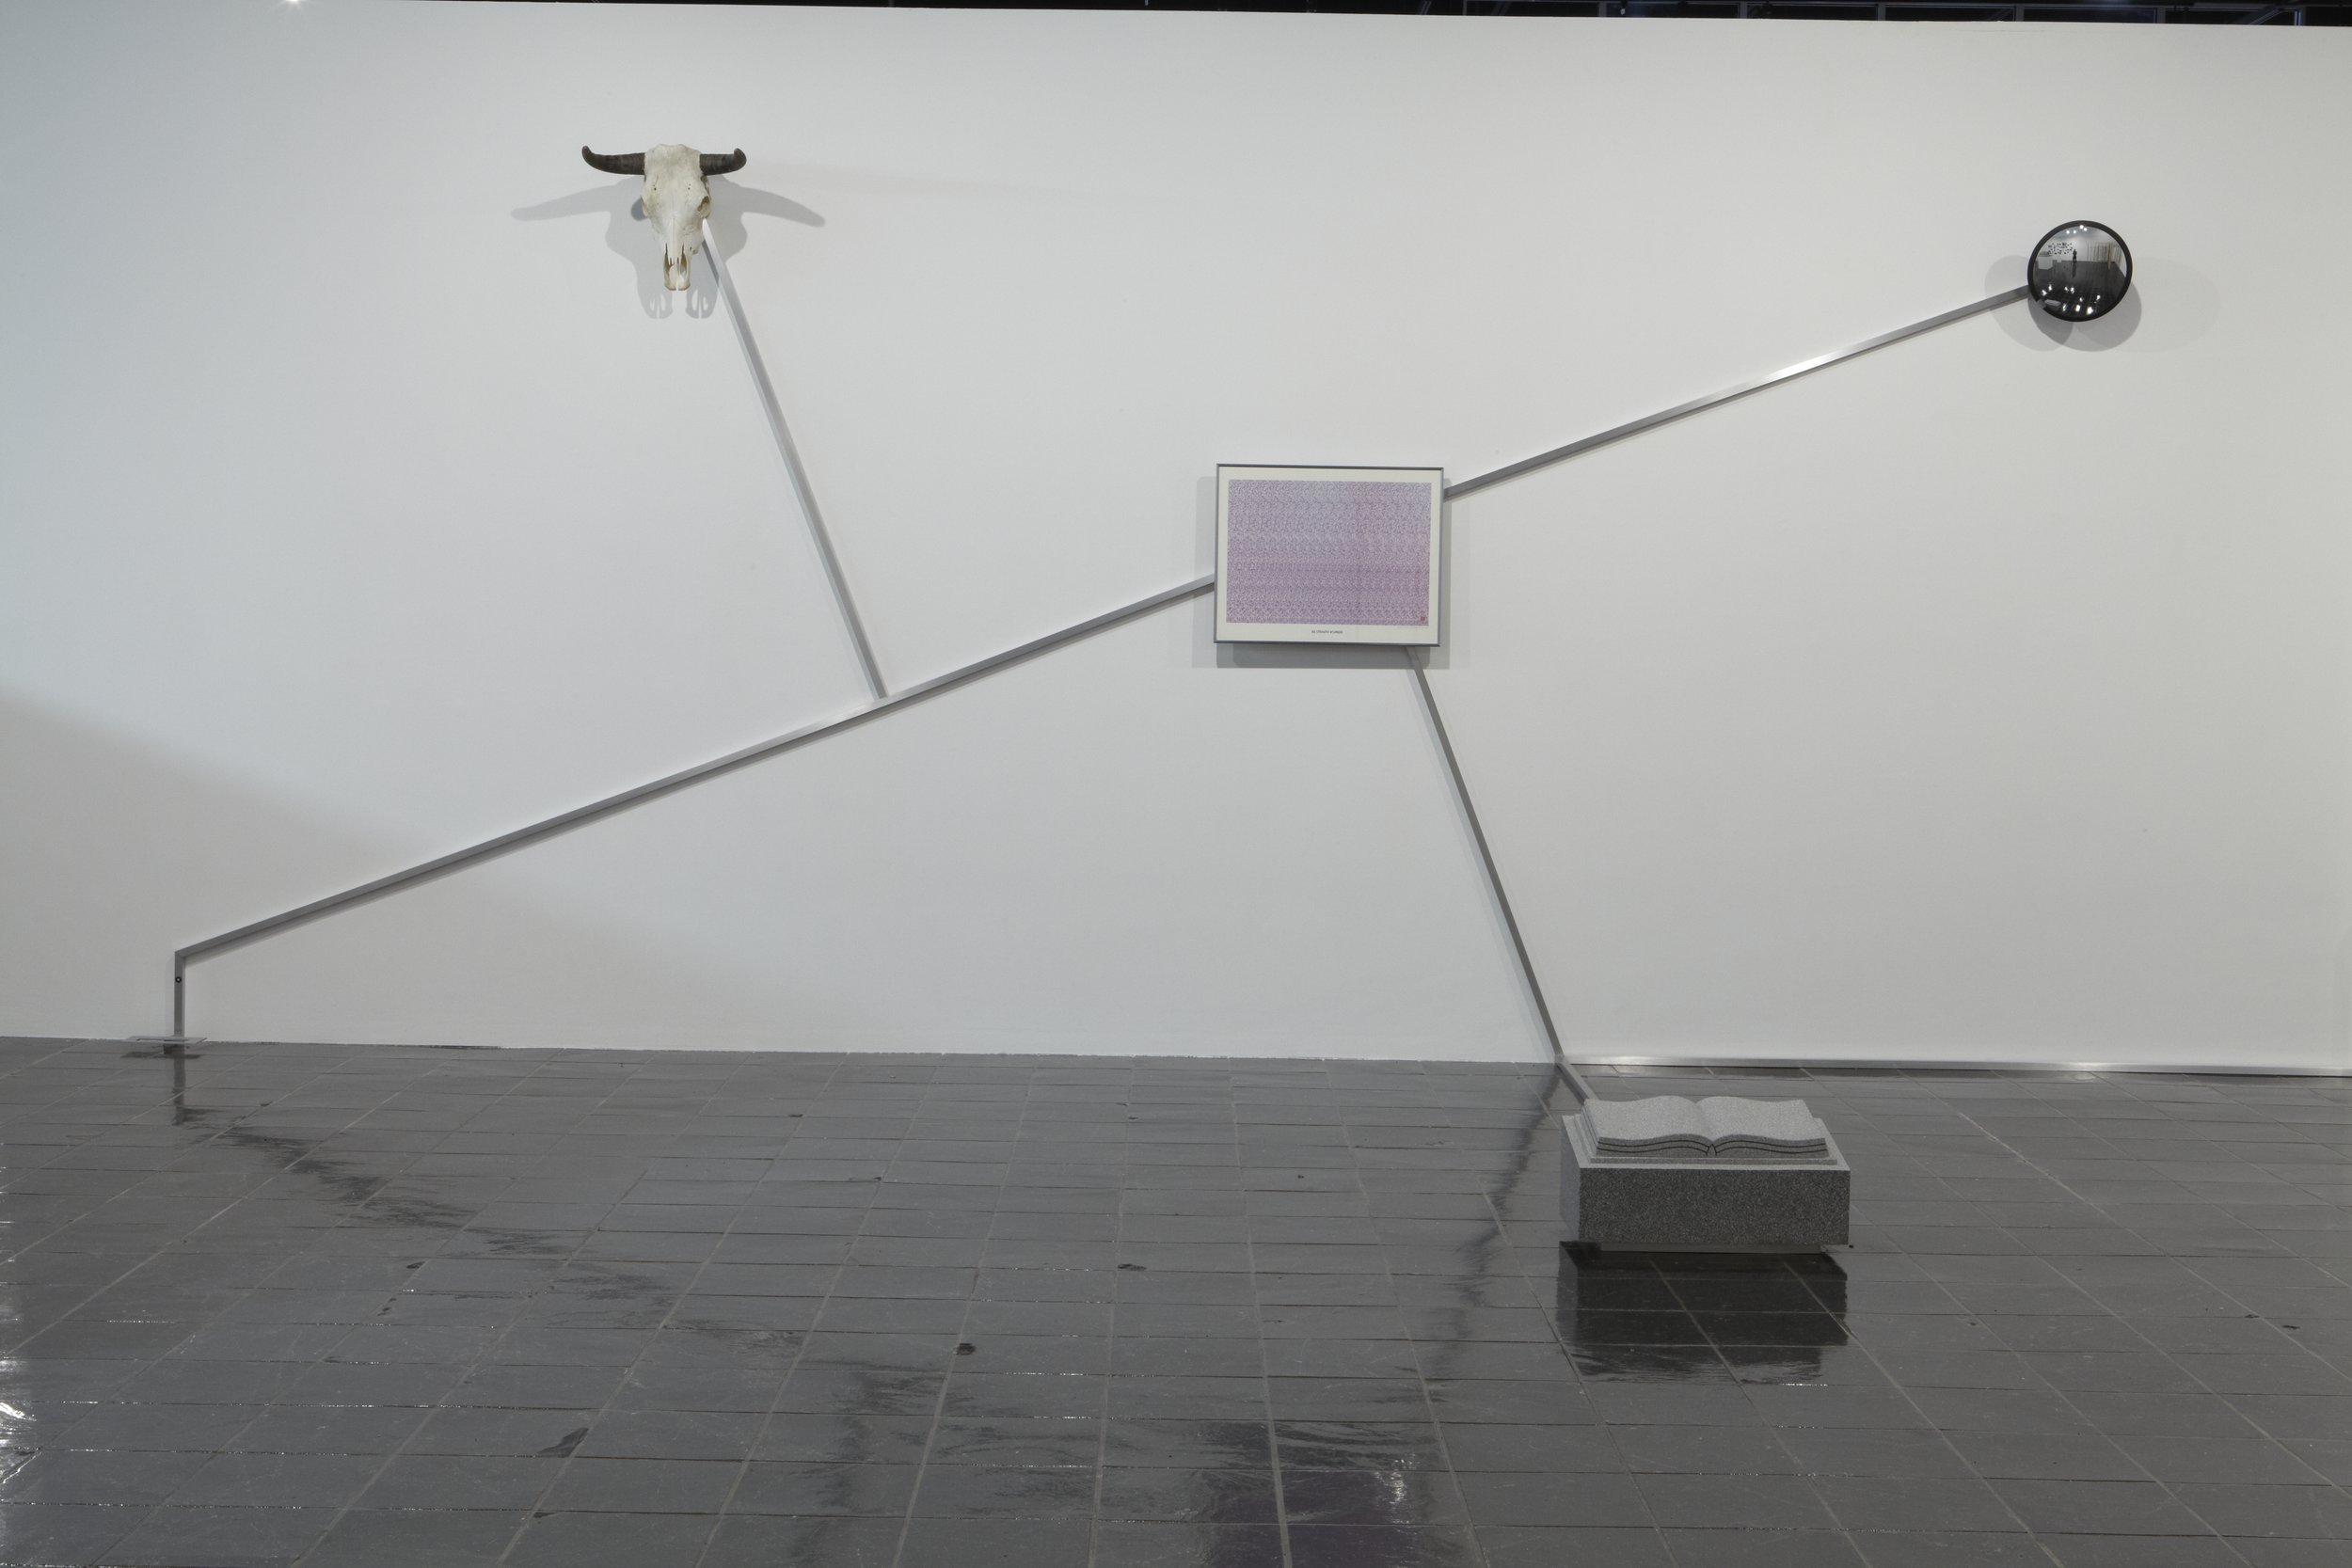  Robert Buck,&nbsp; Constellation ("To find the Western Path, Right thro the Gates of Wrath") , 2008, steel railing and artifacts (headstone, surveillance mirror, steer skull, 3D print, Tumi luggage bag, and barricade),&nbsp;112 x 373 x 110 inches. C